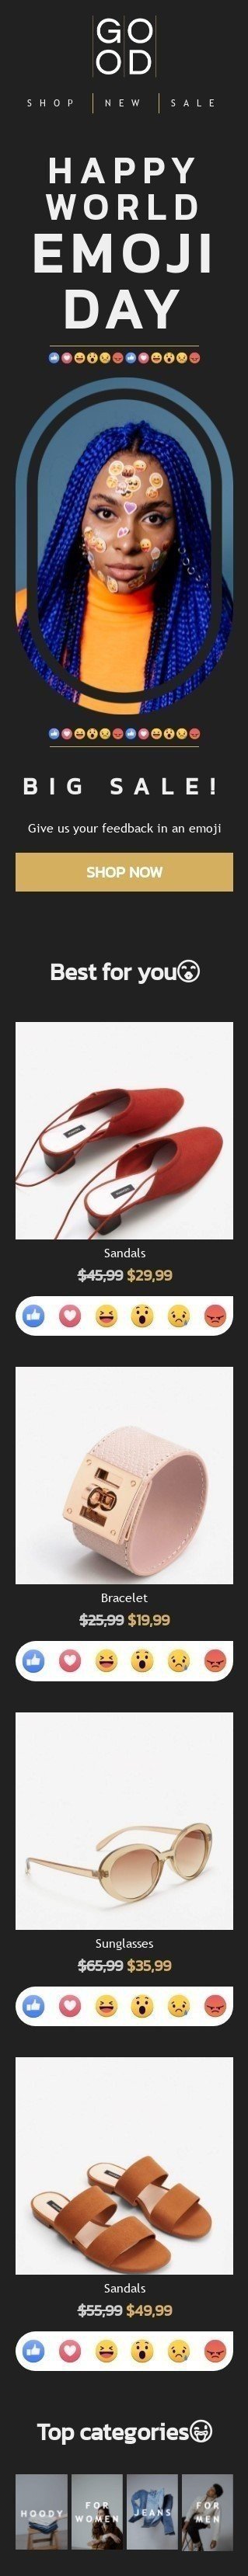 World Emoji Day Email Template "Give us your feedback in an emoji" for Fashion industry mobile view